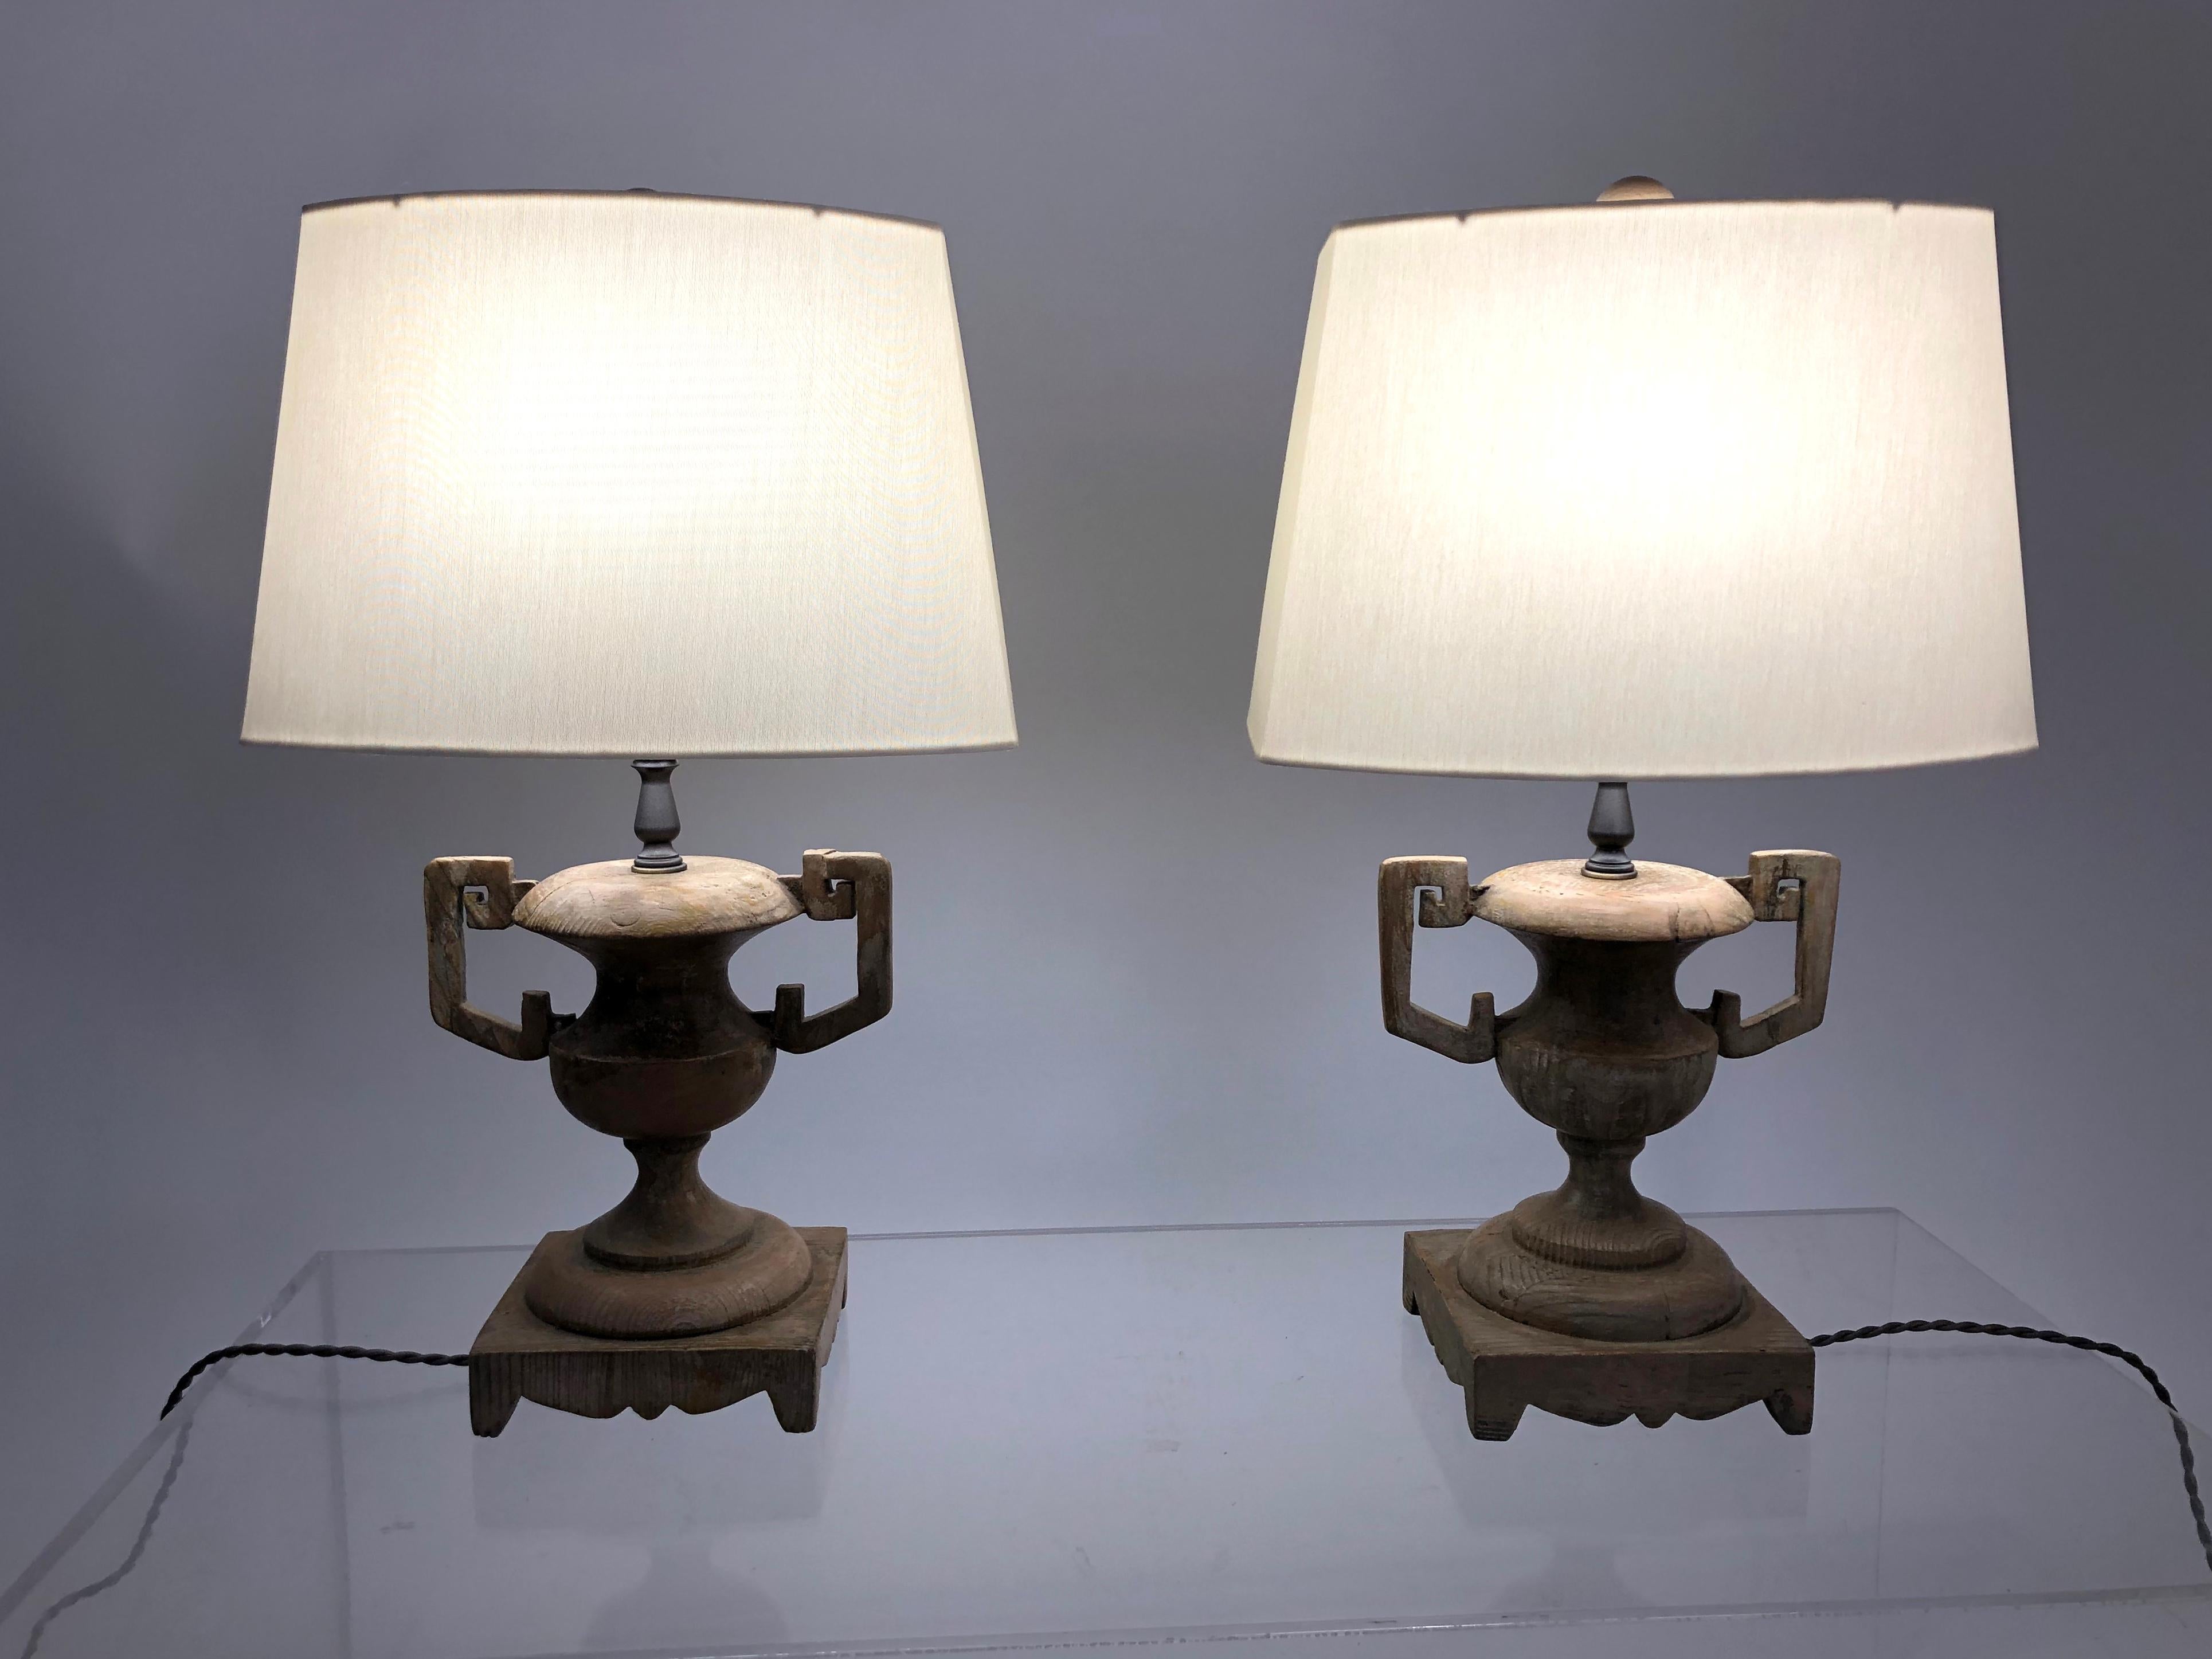 A stylish pair of French carved wood urn-form lamps, with geometric strap handles on scalloped square bases, with new shades and finials. Newly electrified.
Perfect for bedside tables, a console table or ambient lighting in a variety of